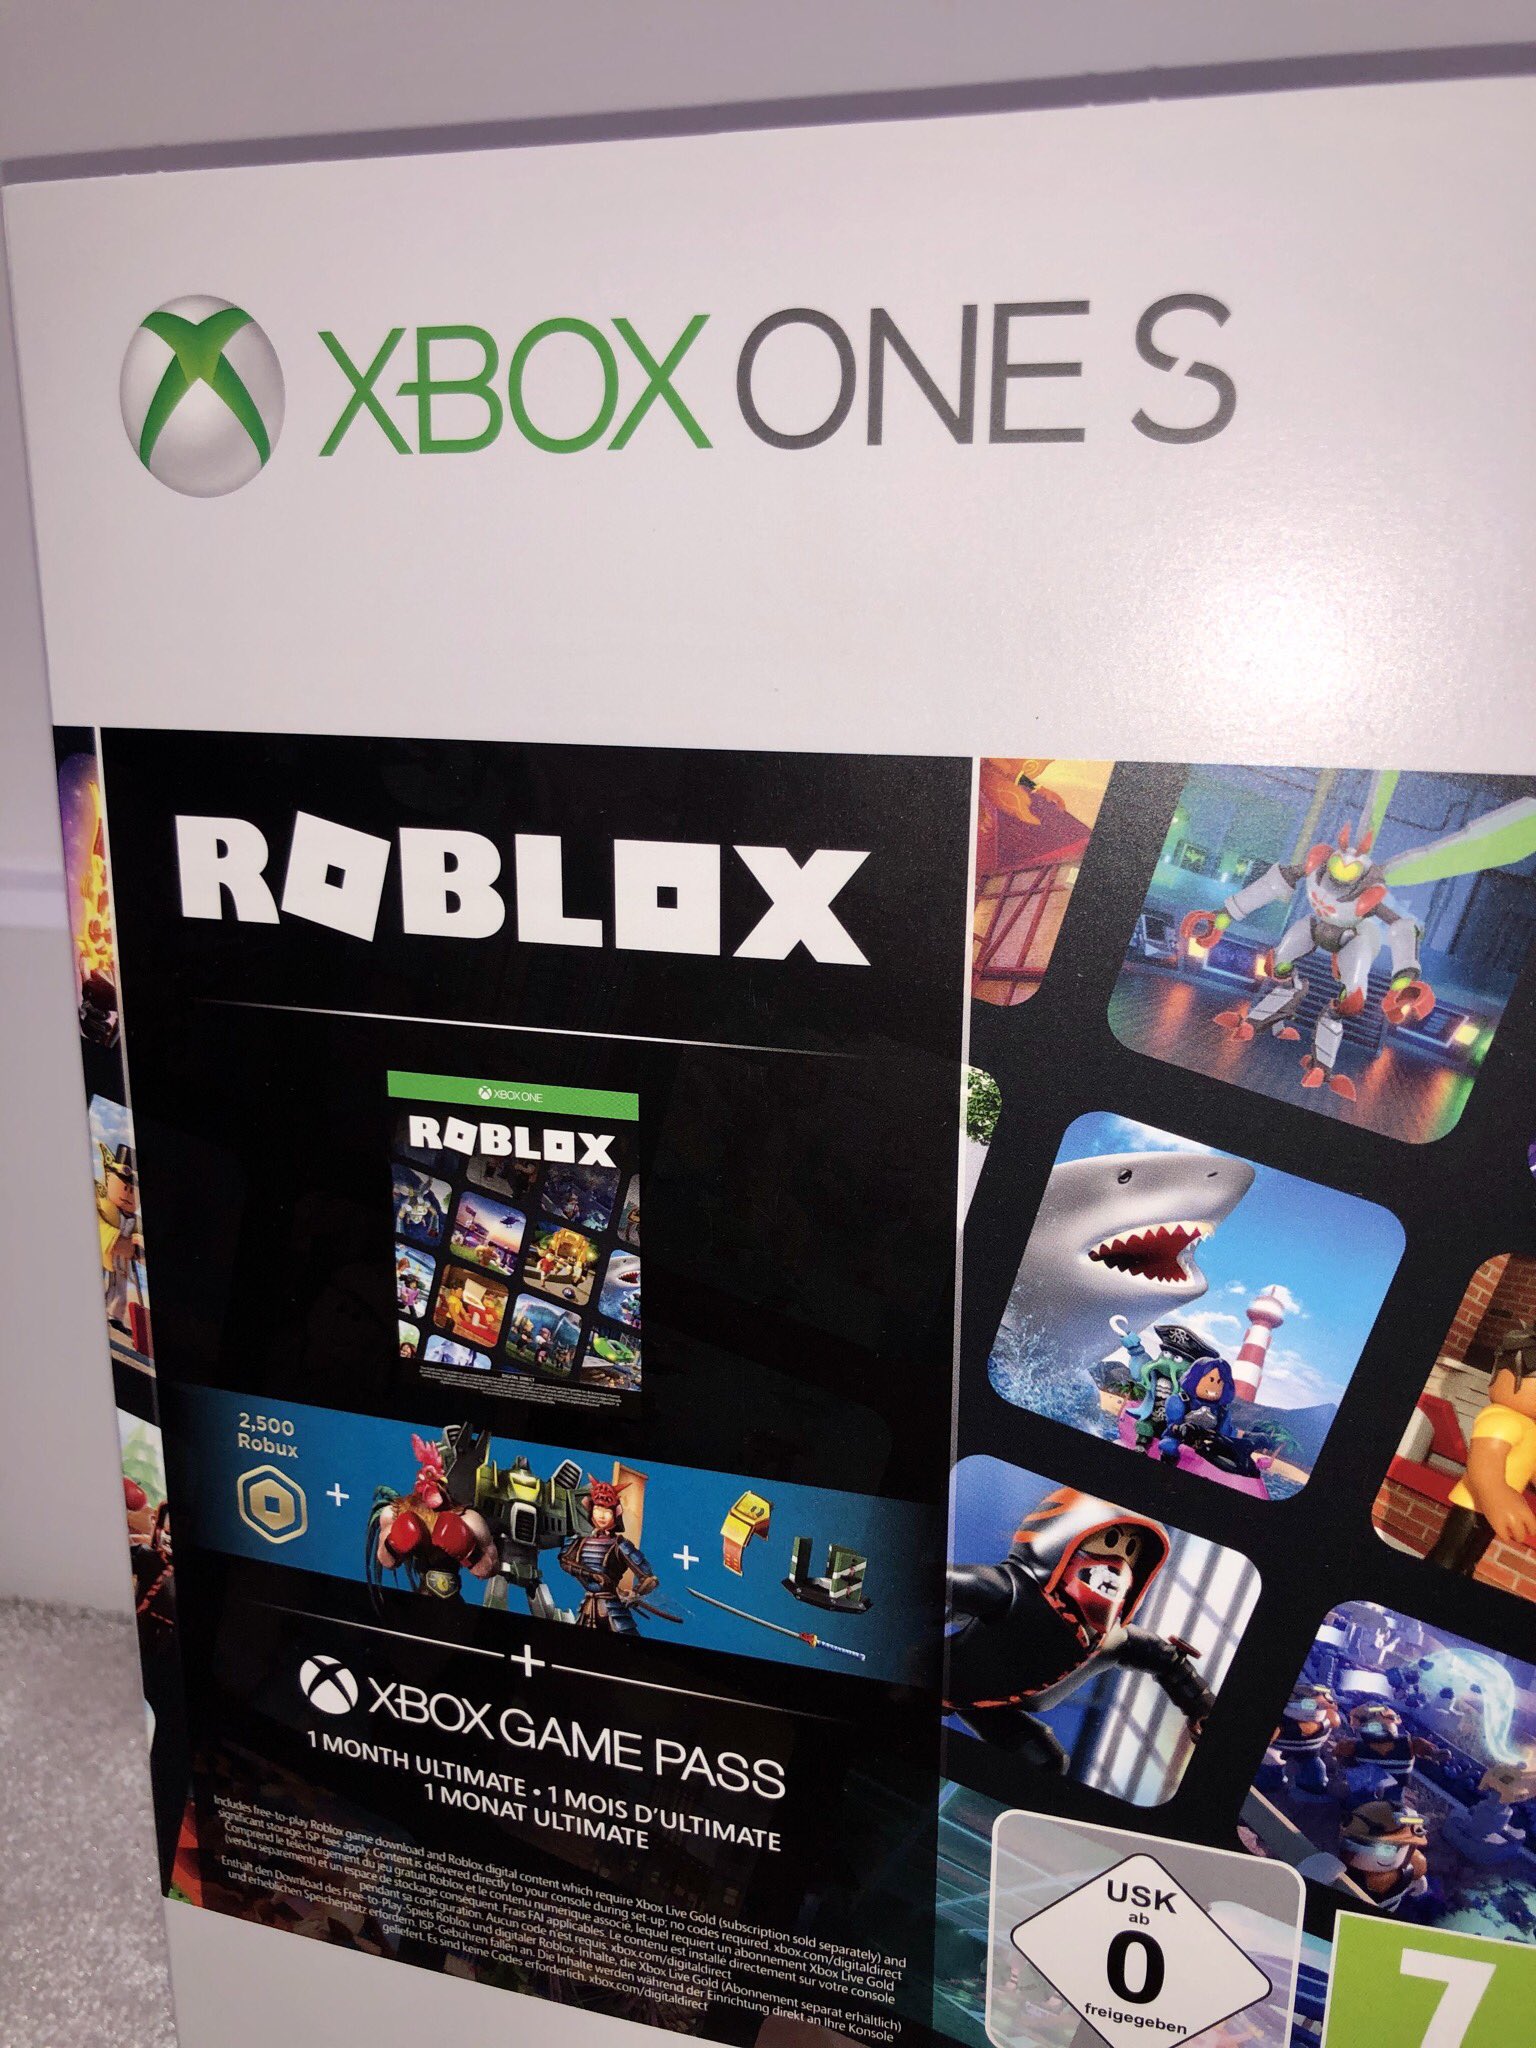 Simon On Twitter Wow Thank You Roblox For Sending Over The Roblox Xbox One Bundle Amazing To See Sharkbite Featured On The Box Art Https T Co Pmlbxygf9q - roblox on xbox 1